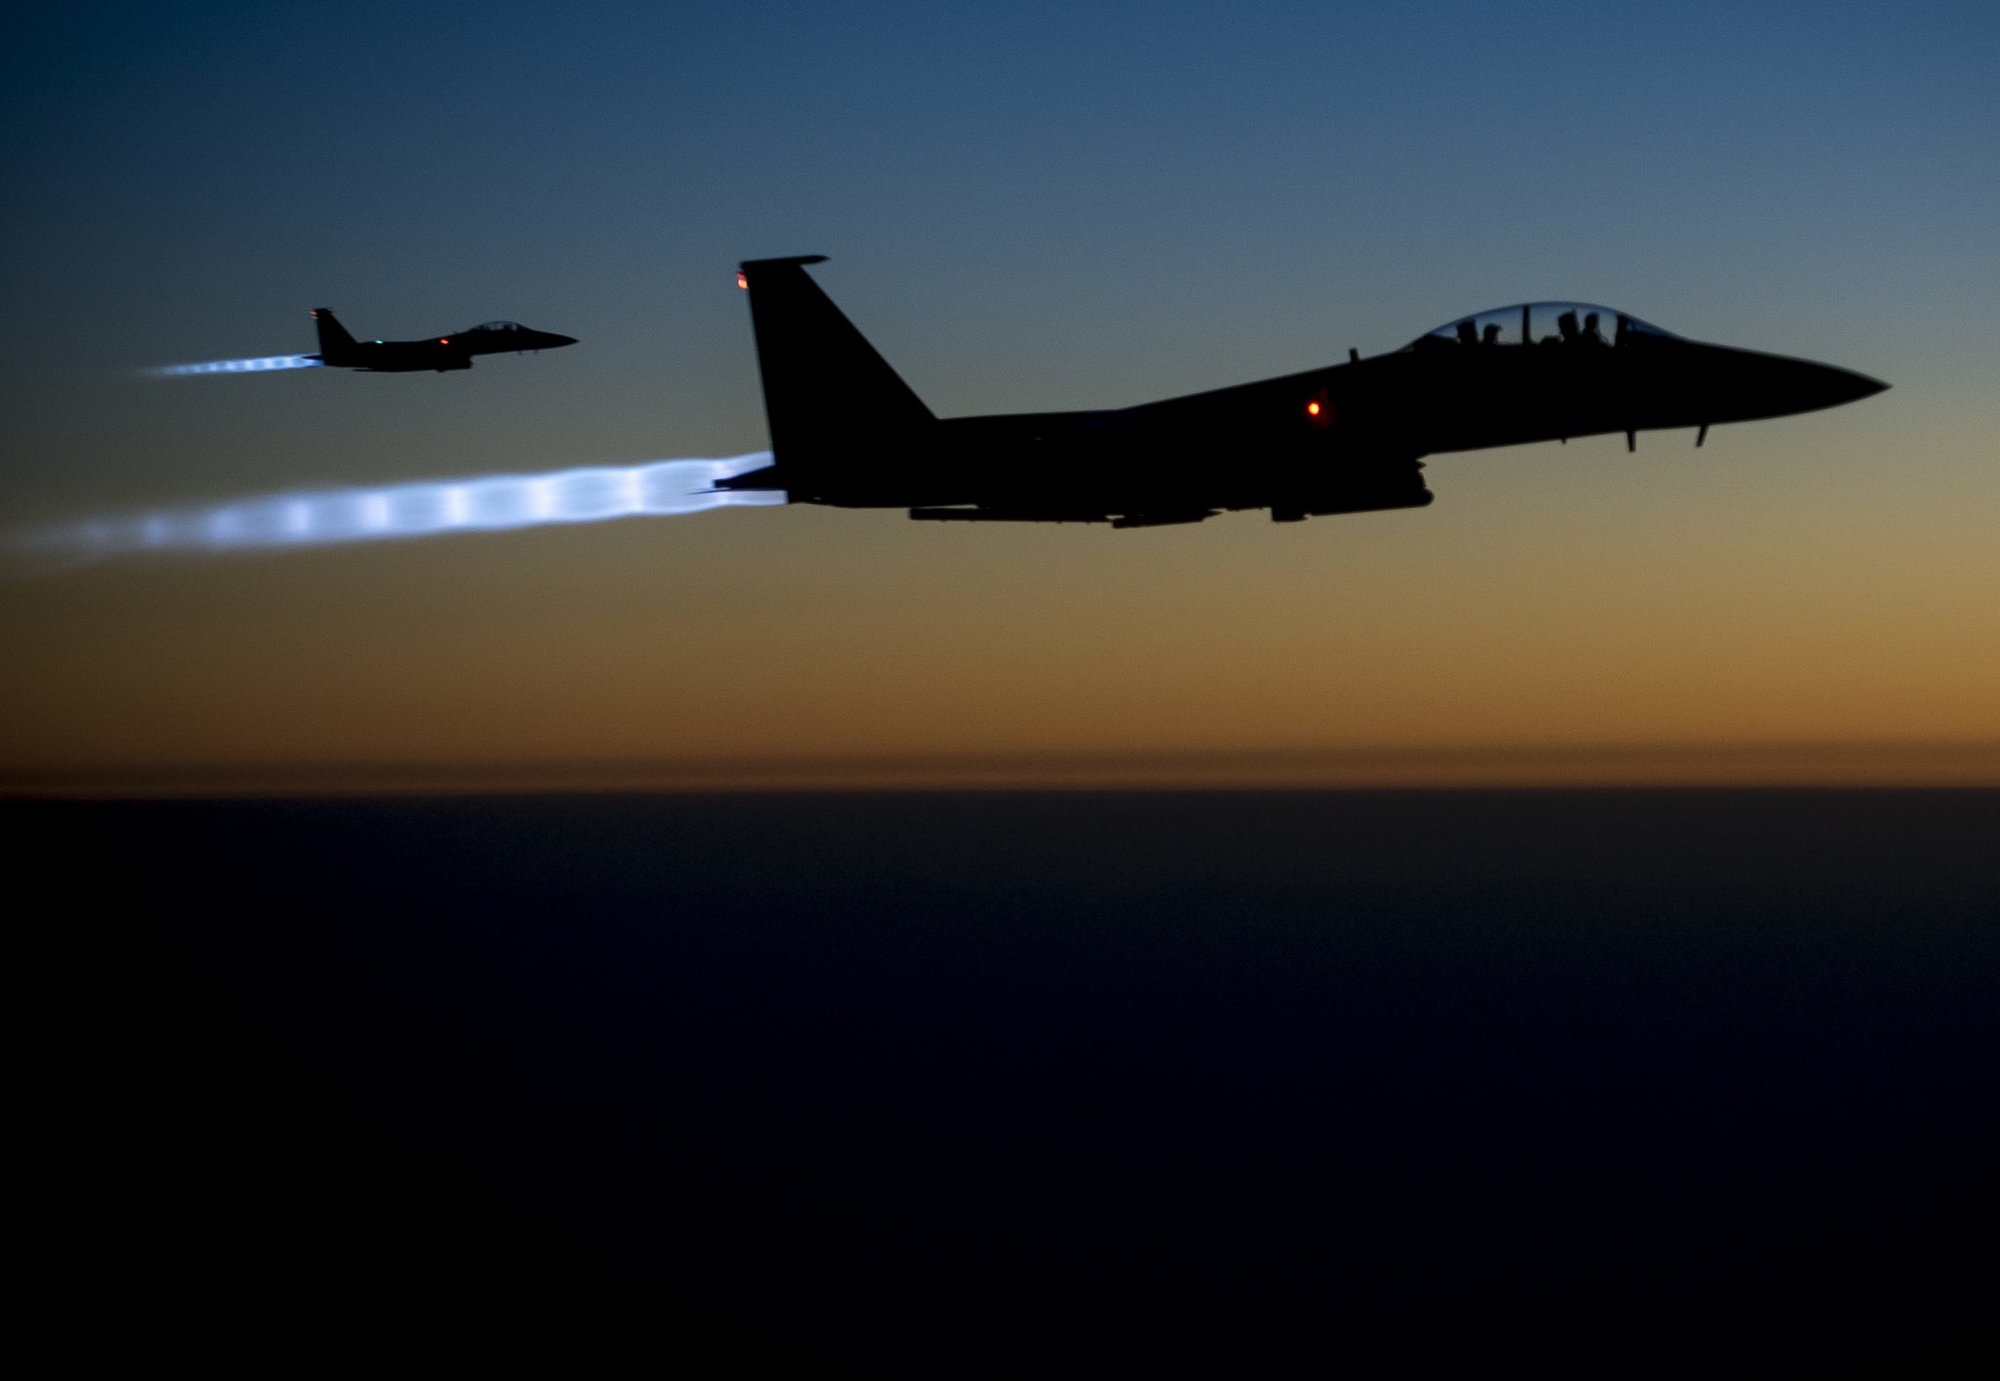 A pair of U.S. Air Force F-15E Strike Eagles fly over northern Iraq early in the morning of Sept. 23, 2014, after conducting airstrikes in Syria. These aircraft were part of a large coalition strike package that was the first to strike ISIL targets in Syria. (U.S. Air Force photo by Senior Airman Matthew Bruch/Released)